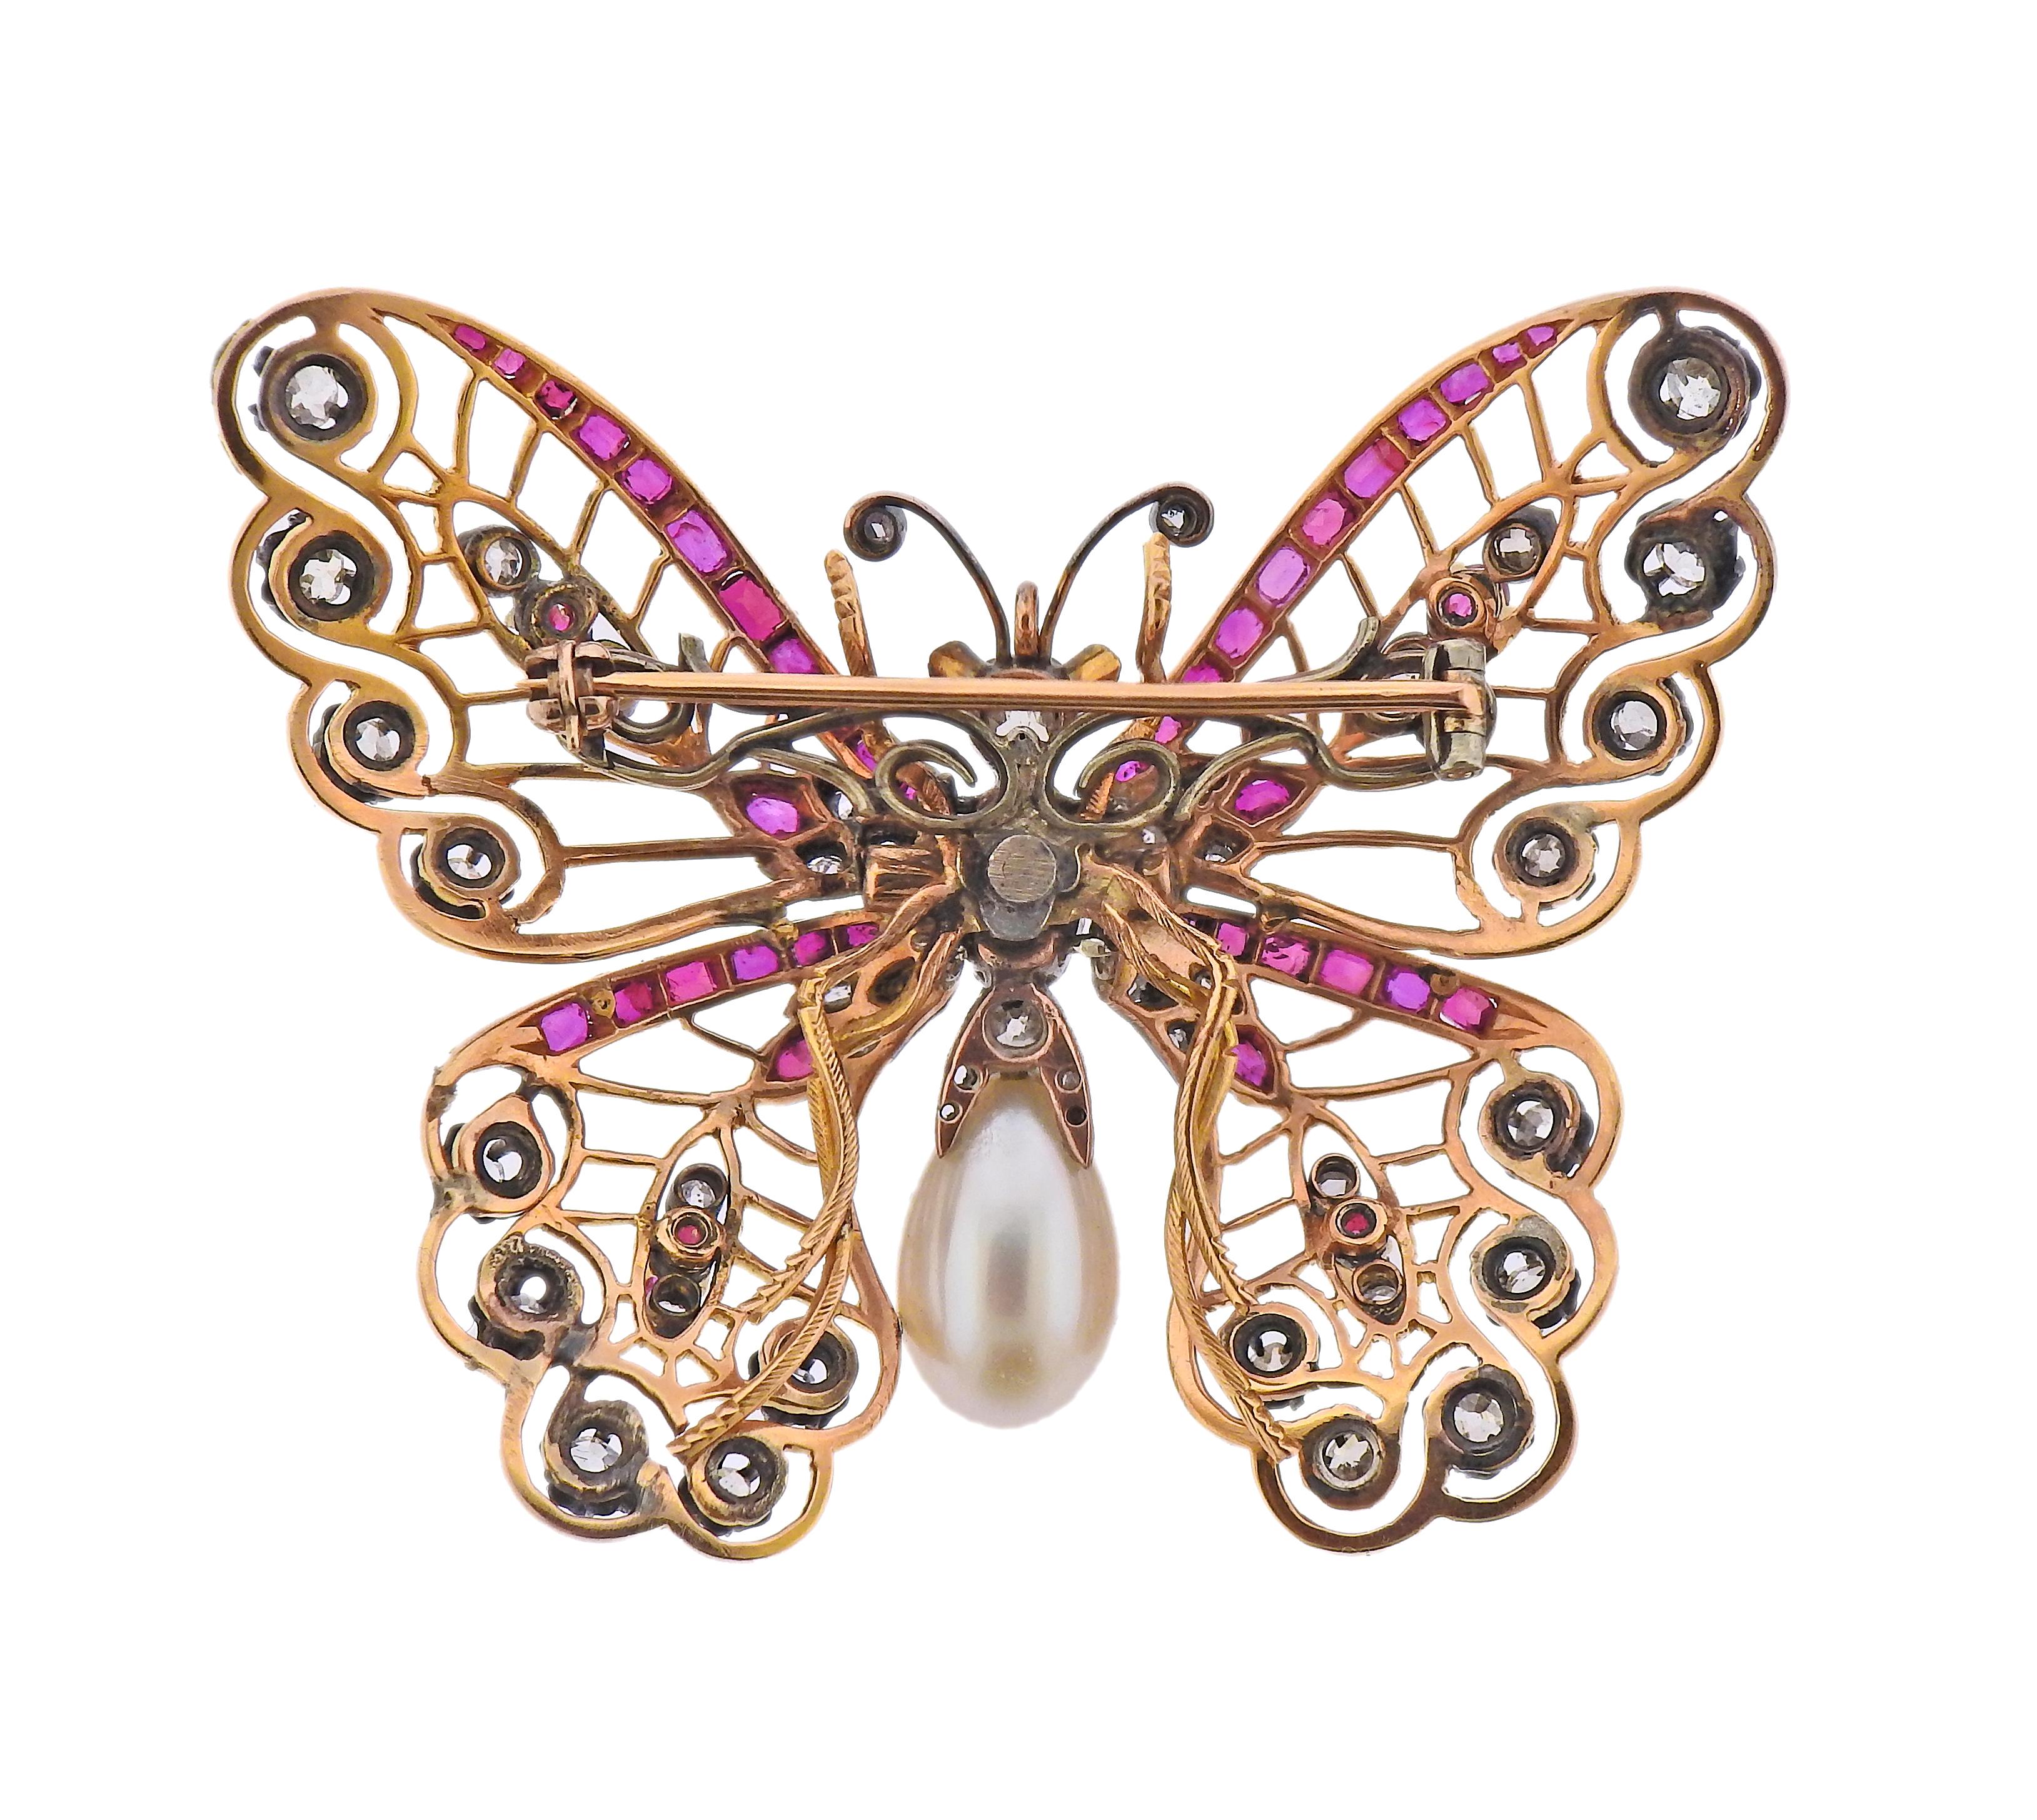 Large antique butterfly brooch, set in 18k gold and silver, adorned with rose cut diamonds, rubies and a pearl. Brooch measures 50mm x 58mm. Weight - 24.8 grams.